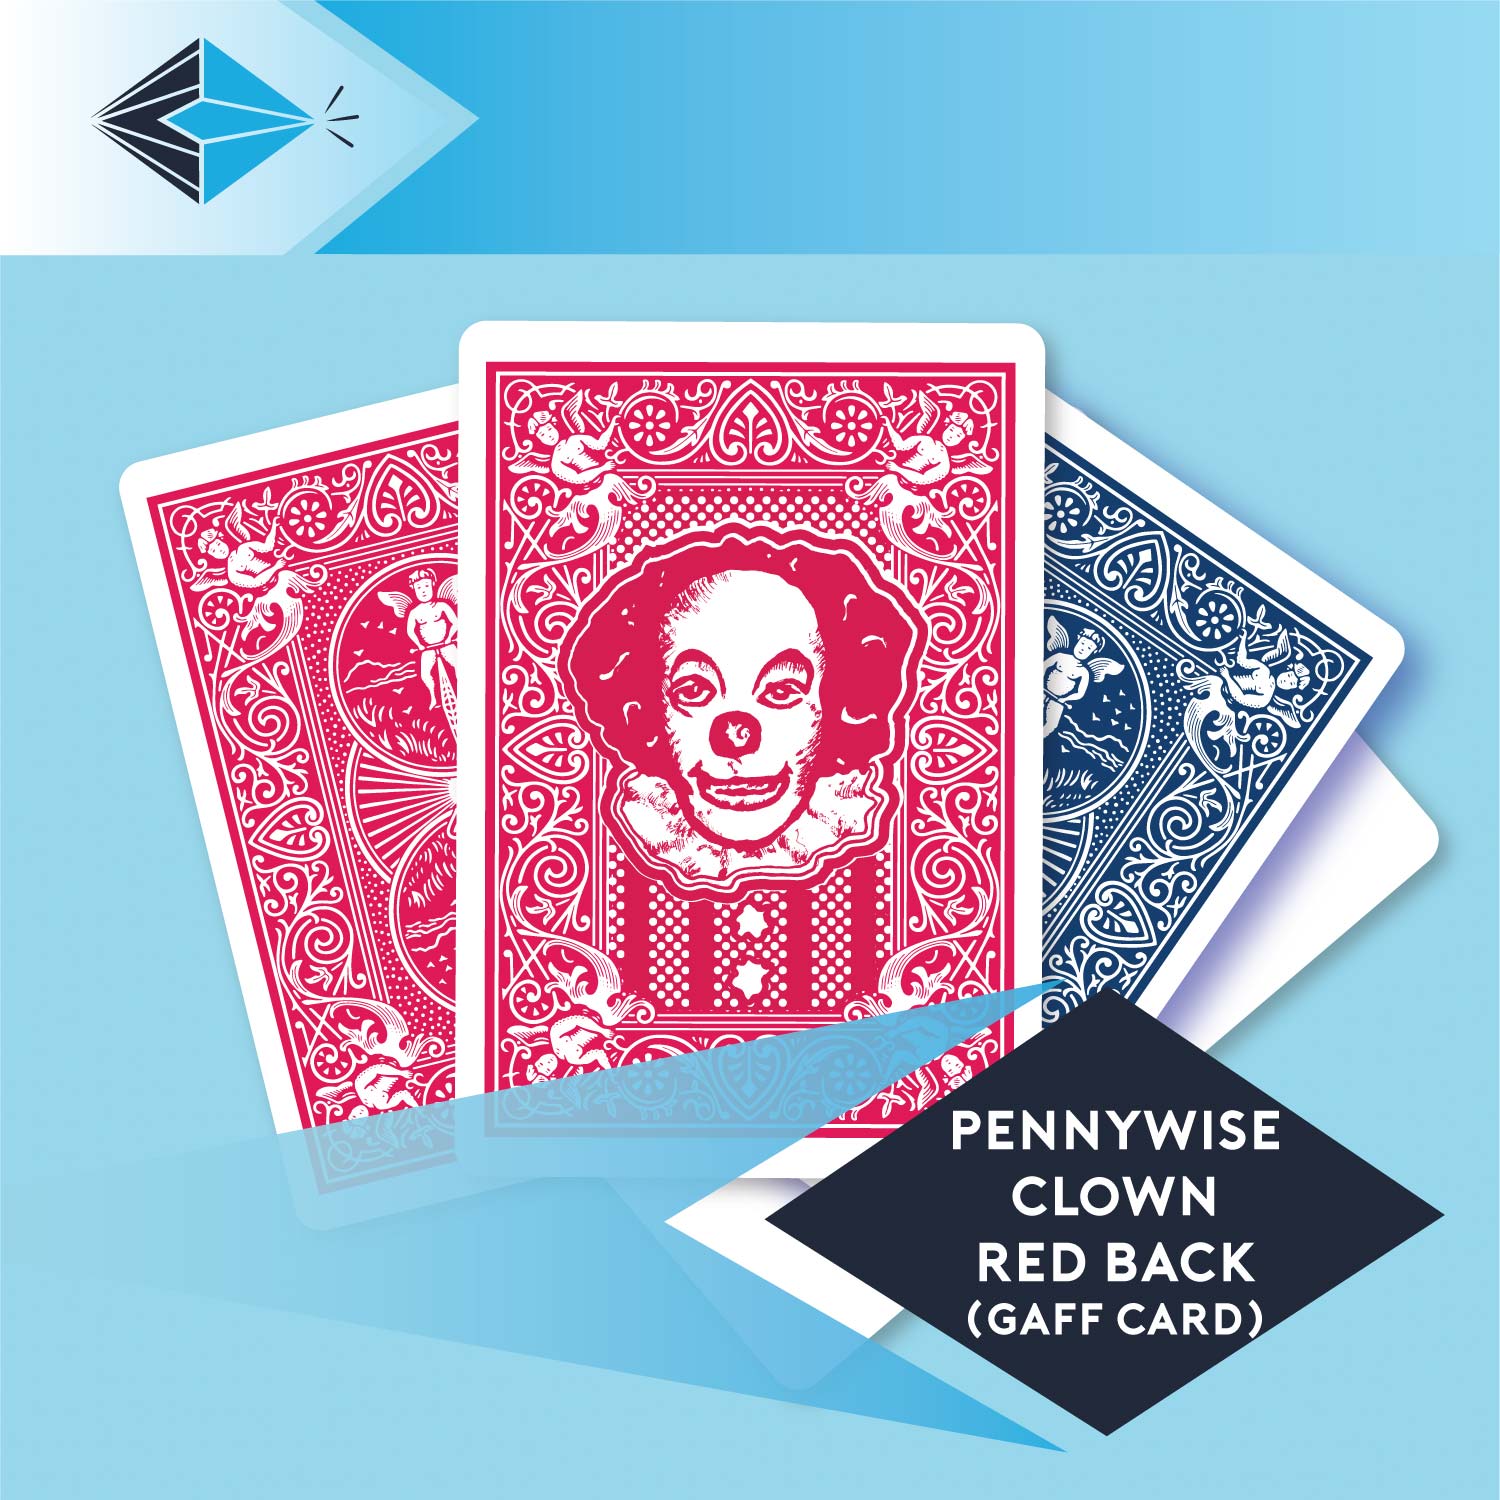 pennywise clown red back gaff card 129 playing card for magicians printing printers Stockport Manchester UK